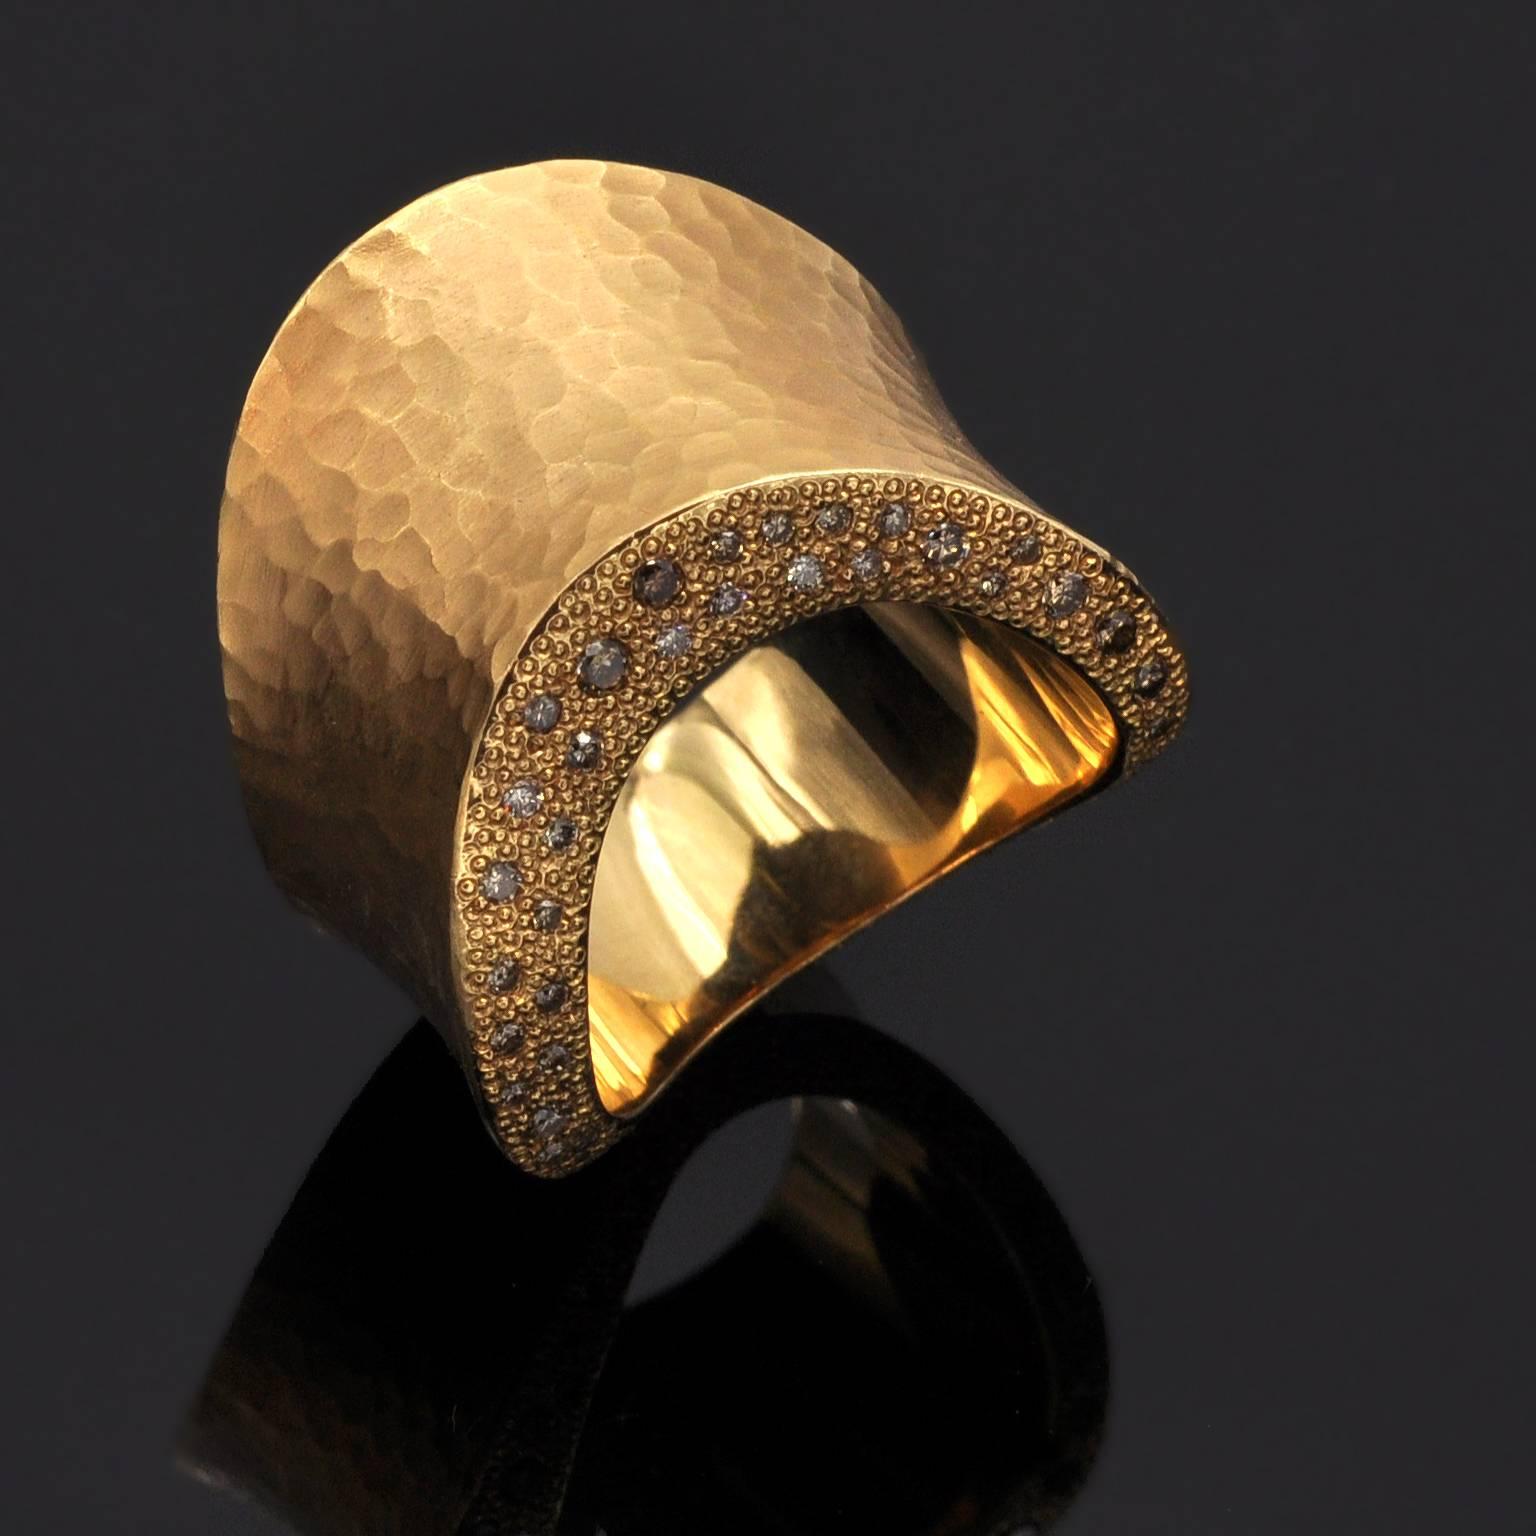 Stylish band ring, the top is hand hammered 18kt rose gold, the sides are textured gold and set with brilliant cut diamonds the color of which range from champagne to cognac. the design itself is refined and feminine.
diamonds : 0.82ct